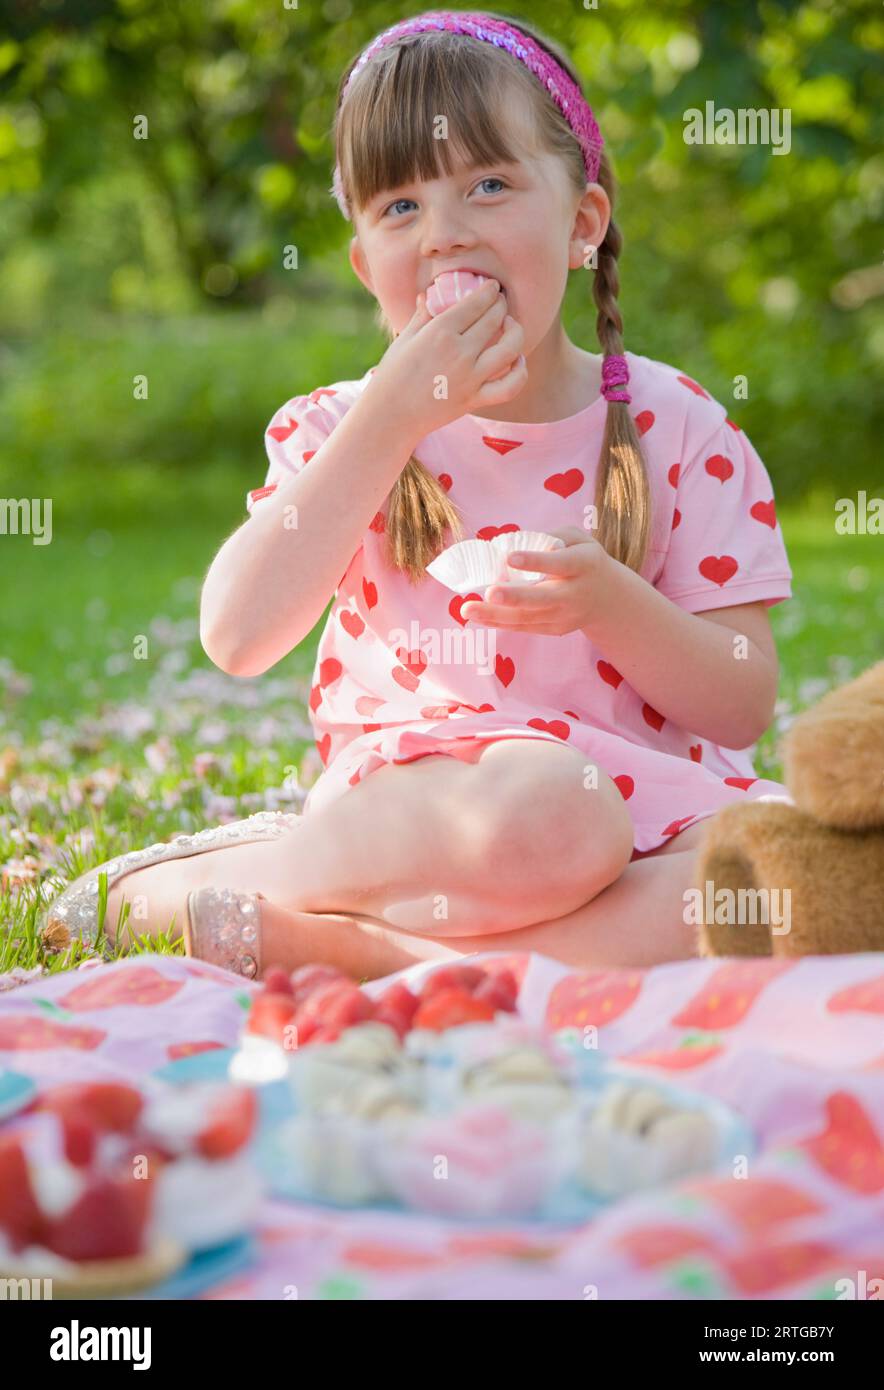 Young girl sitting in a garden smiling and eating a cupcake Stock Photo